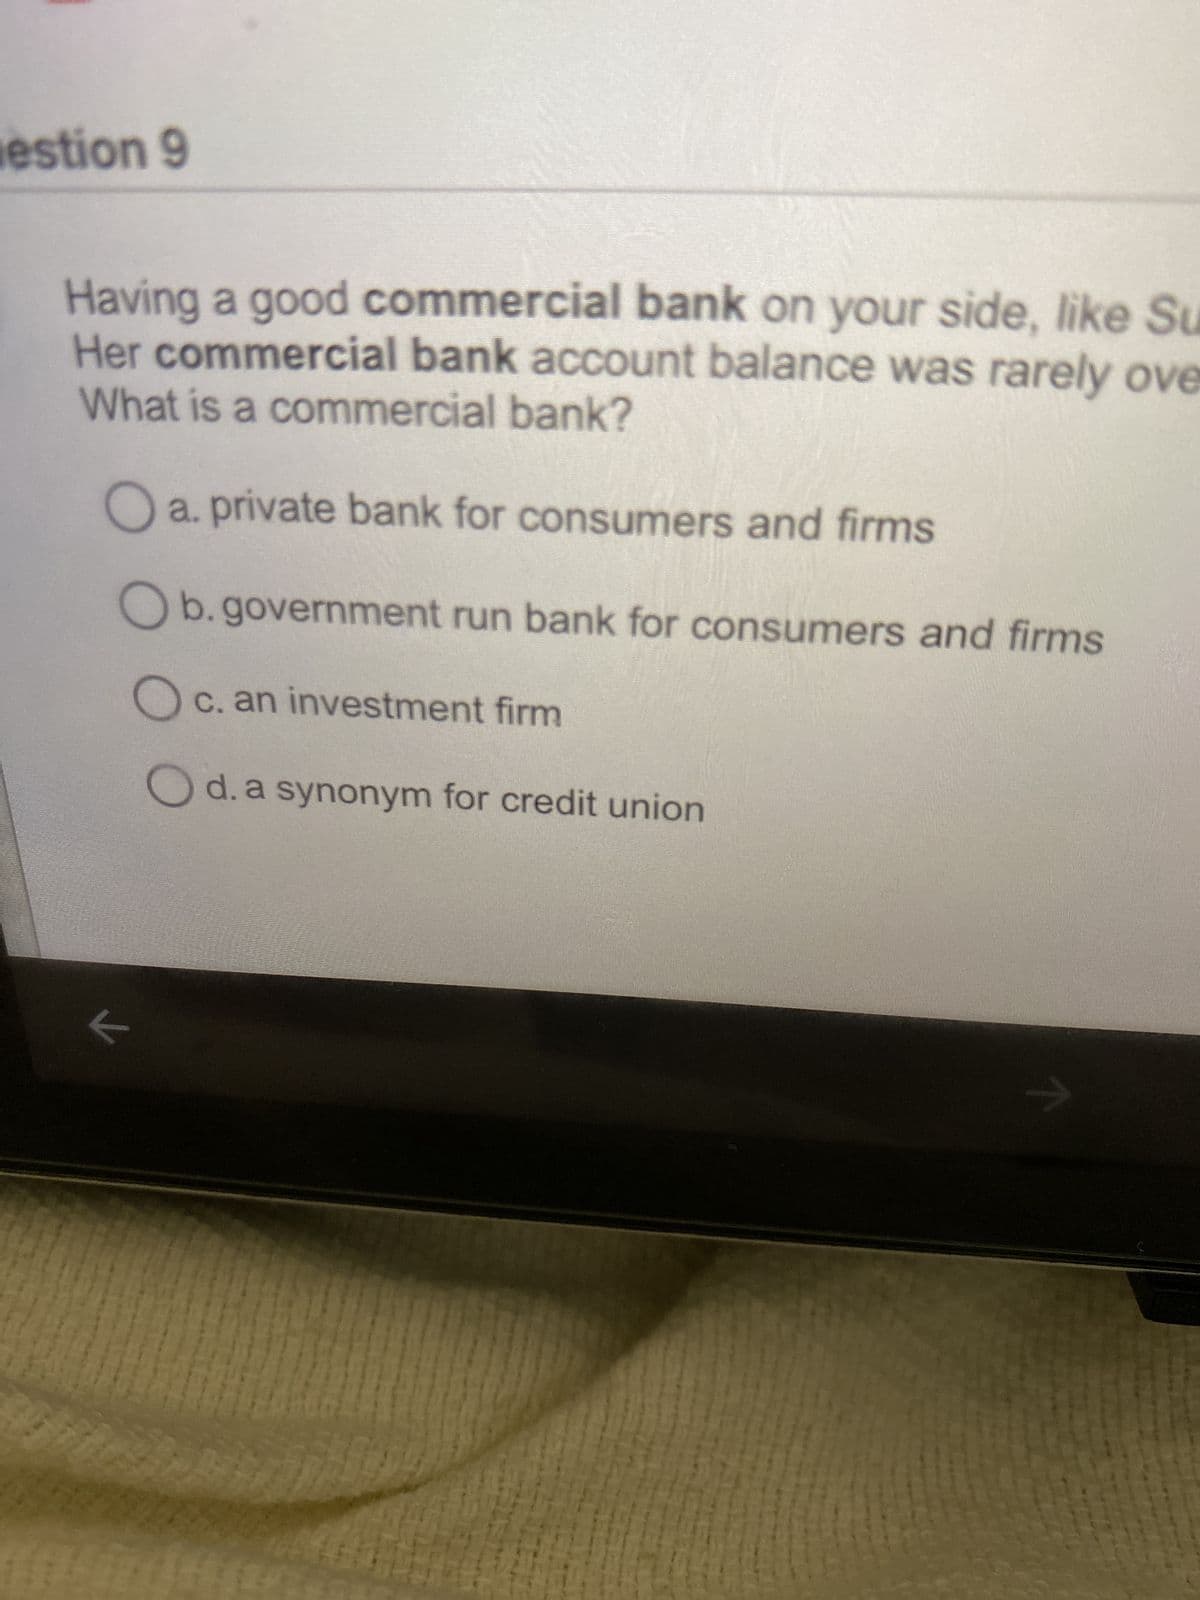 estion 9
Having a good commercial bank on your side, like Su
Her commercial bank account balance was rarely ove
What is a commercial bank?
Oa. private bank for consumers and firms
Ob.government run bank for consumers and firms
Oc. an investment firm
Od. a synonym for credit union
←
Hil
447744
m
7